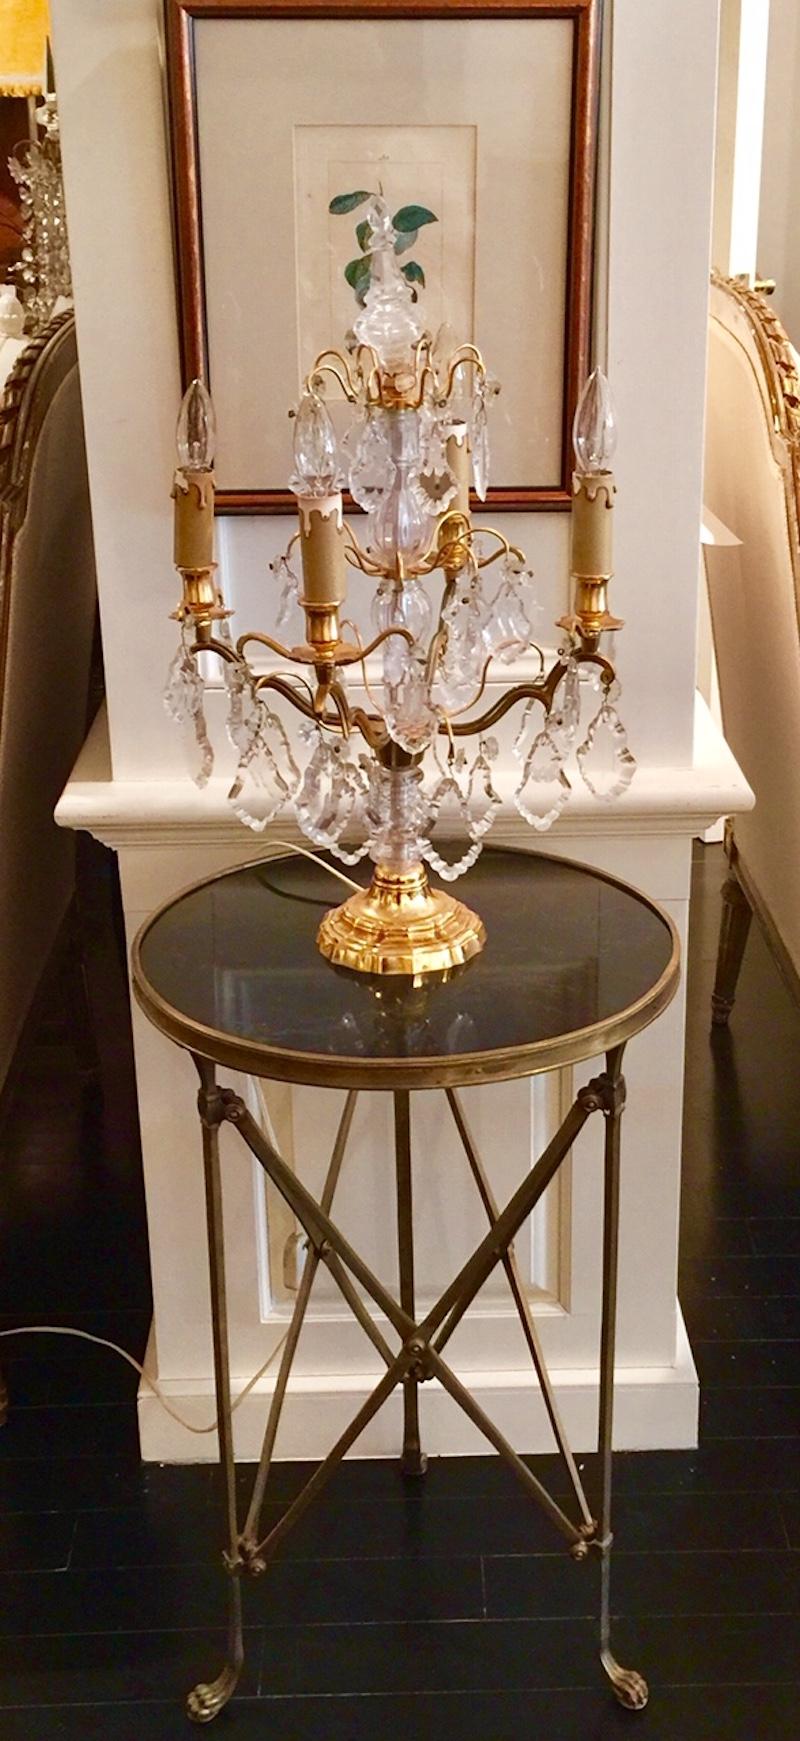 A classic French bronze and black marble round gueridon table on slendor legs with paw feet. A round black marble top is encircled by a decorative bronze band. The legs are joined by an openwork triangular bronze crosspiece. 

Dimension: 16.75 in